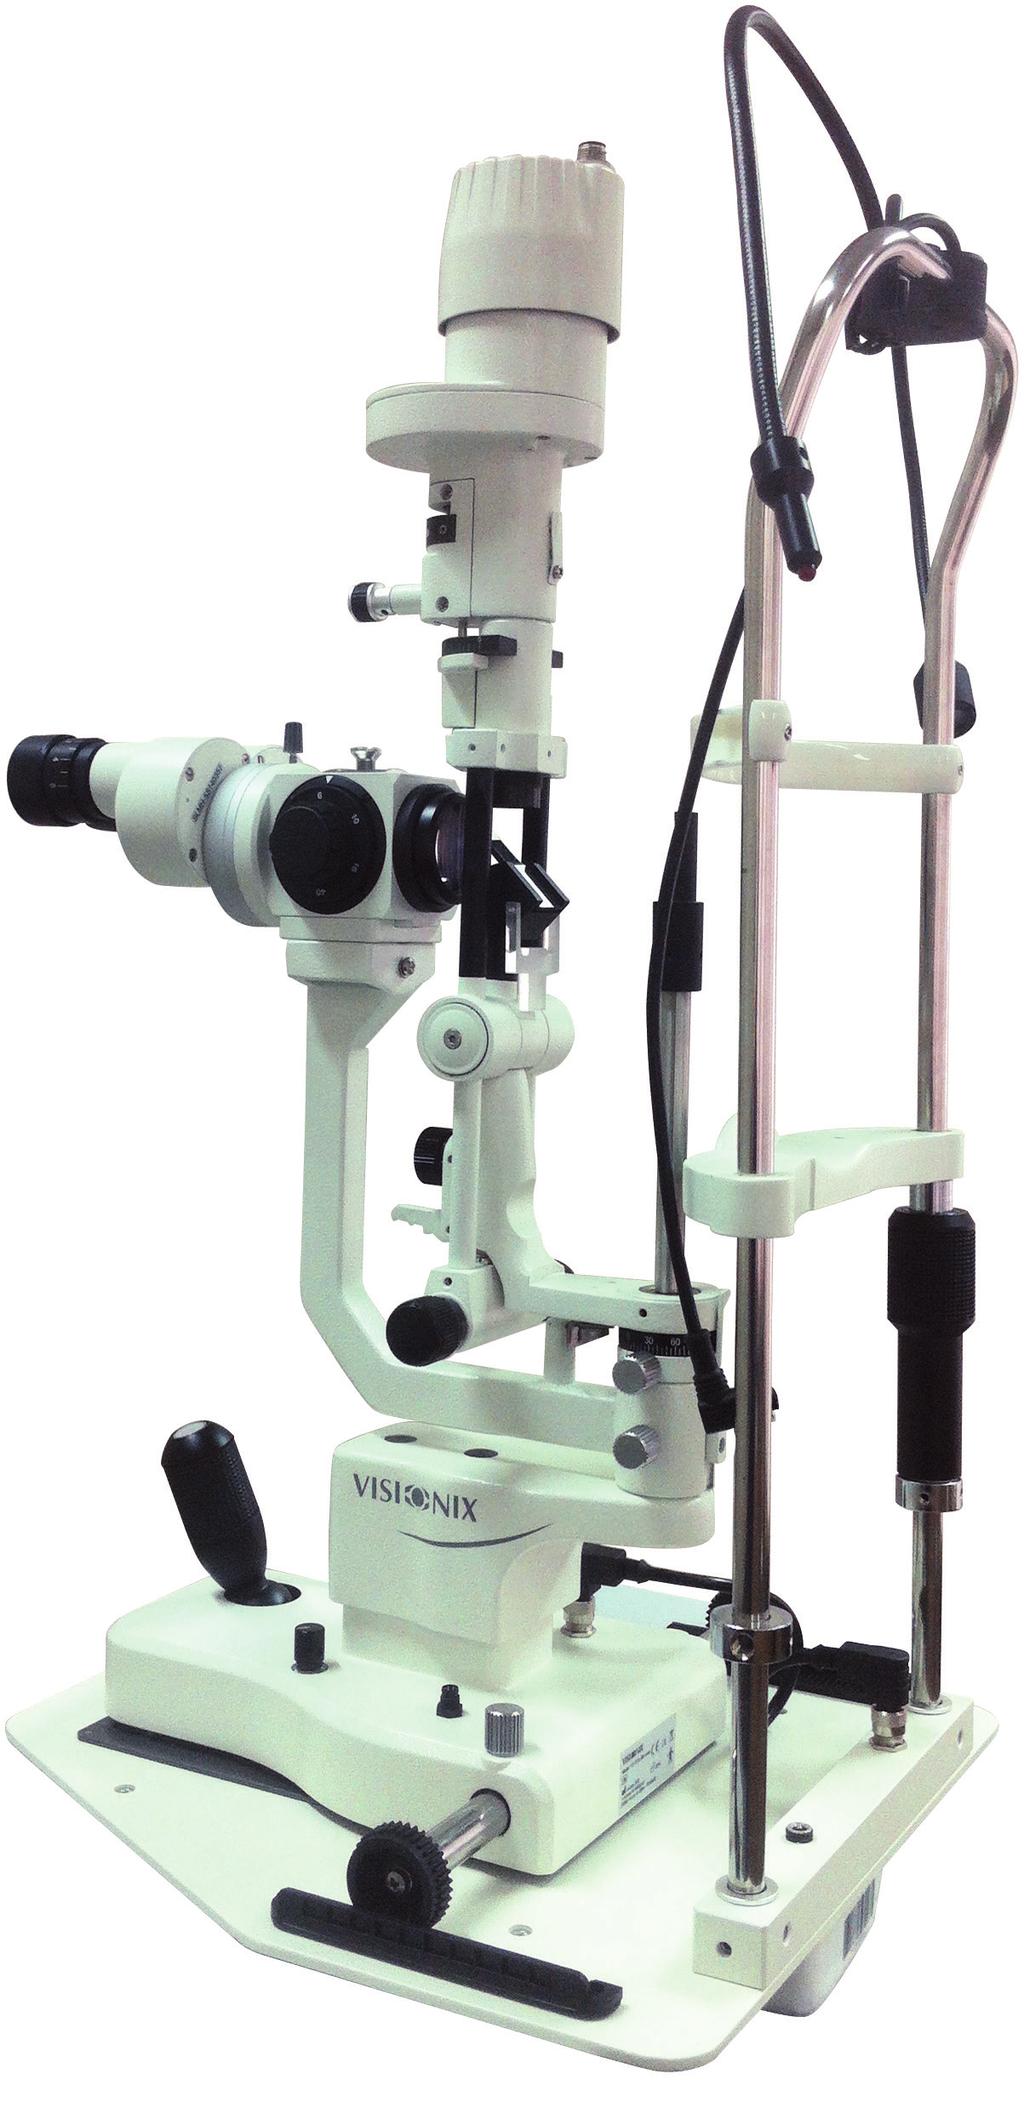 Slit Lamps VX70 Stereo Microscope Converging 6-5 magnifications REF. 8470-0001-05 Converging 6 - magnifications REF. 8470-0001-0 Converging 6-2 magnifications REF.